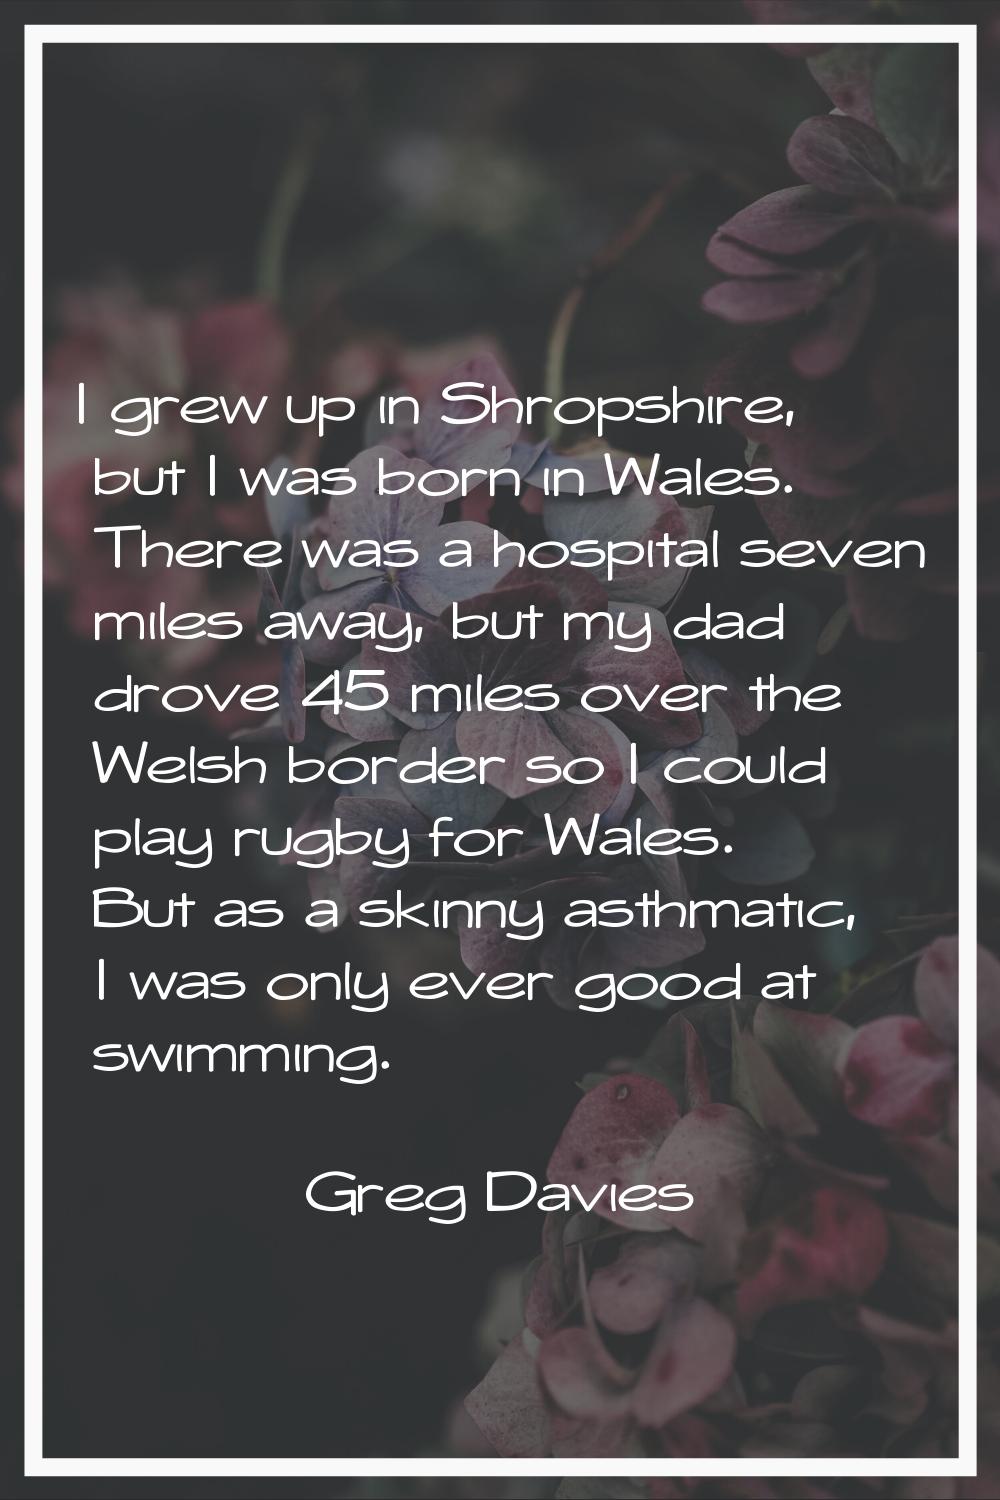 I grew up in Shropshire, but I was born in Wales. There was a hospital seven miles away, but my dad